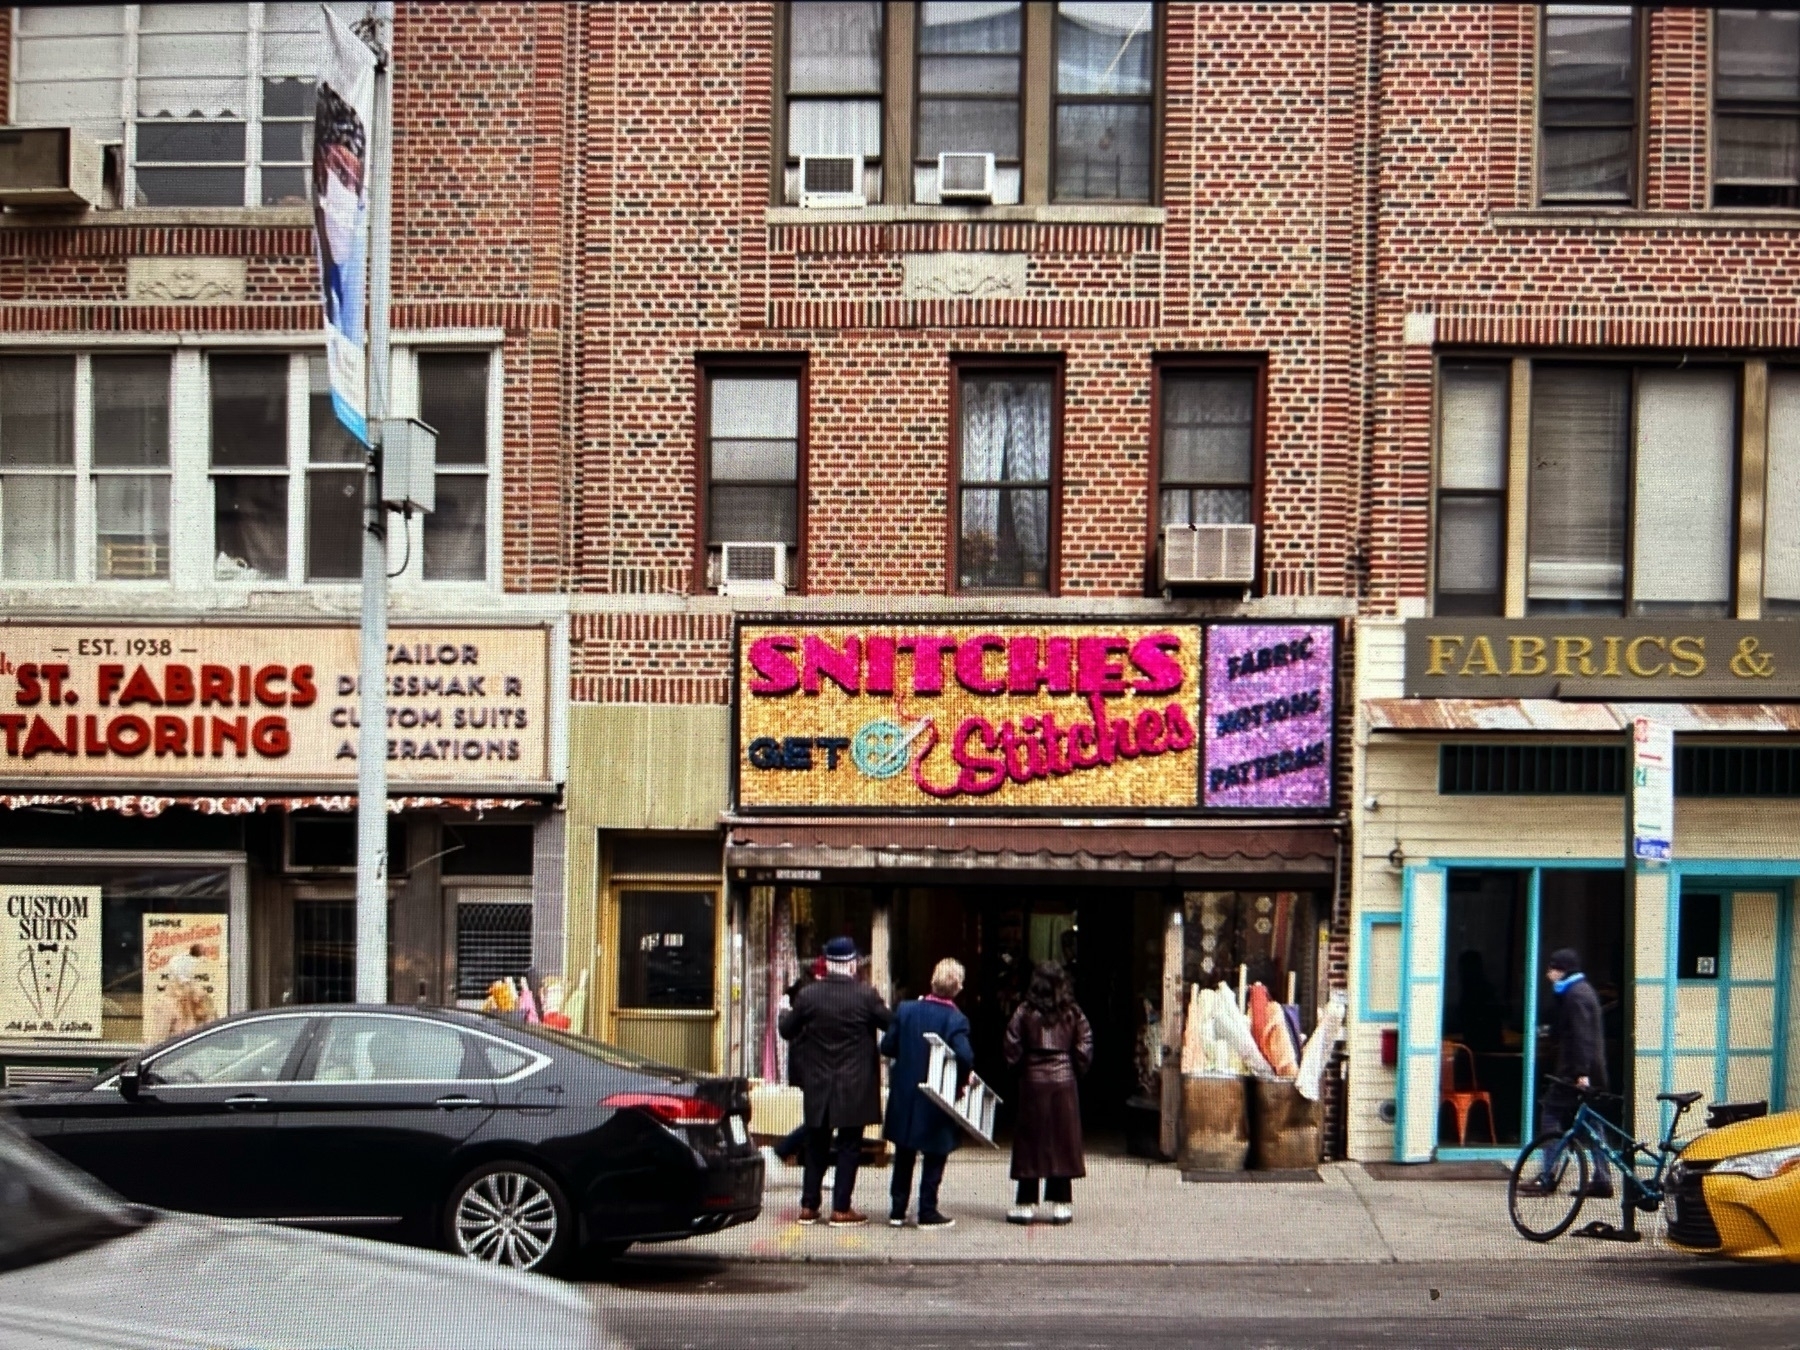 Still capture of a scene from the Hulu show “Only Murders in the Building”, showing a New York streetfront with a business called “Snitches Get Stitches”